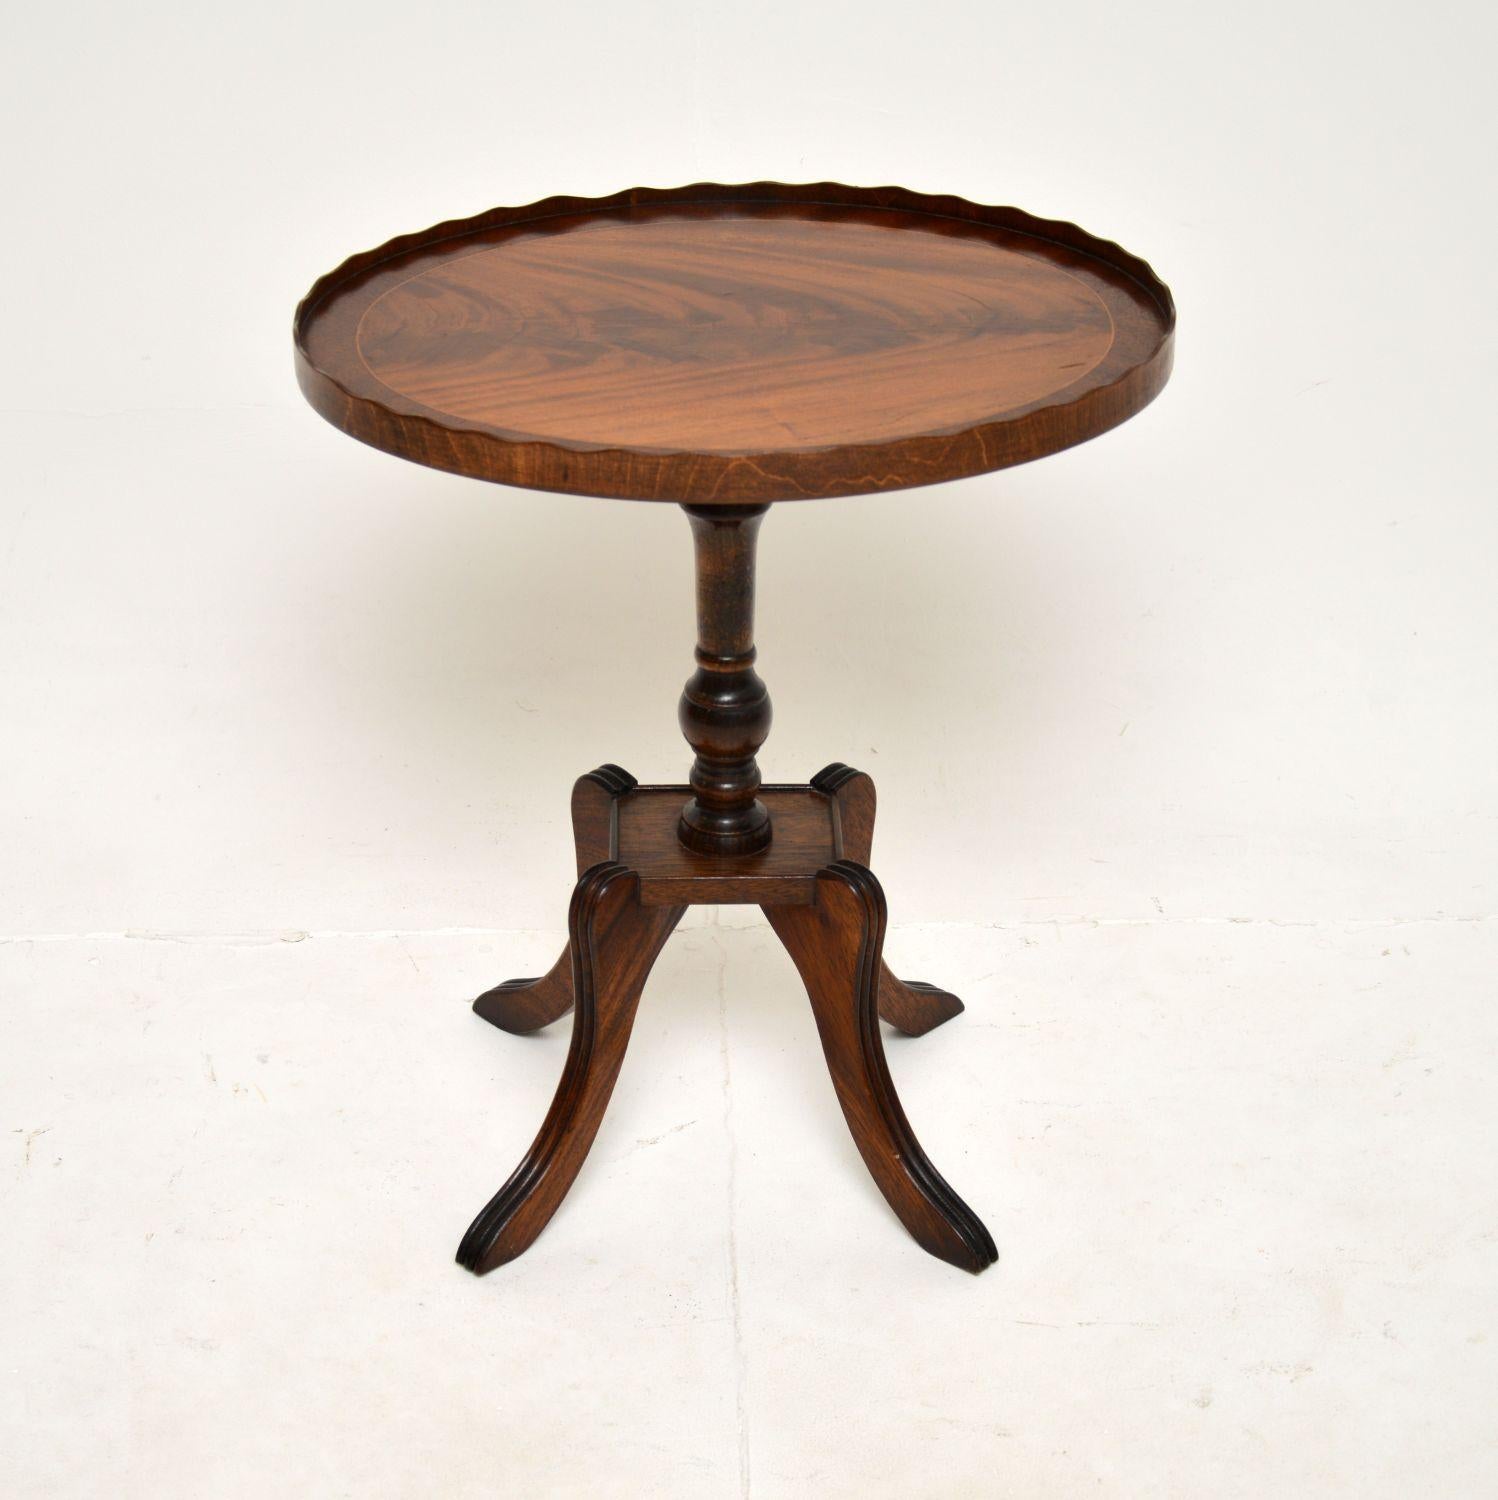 A beautifully made antique Regency style pie crust coffee / side table. This was made in England, it dates from around the 1950’s.

The oval top is cross banded and has gorgeous grain patterns, with a raised pie crust edge. It sits on a beautifully